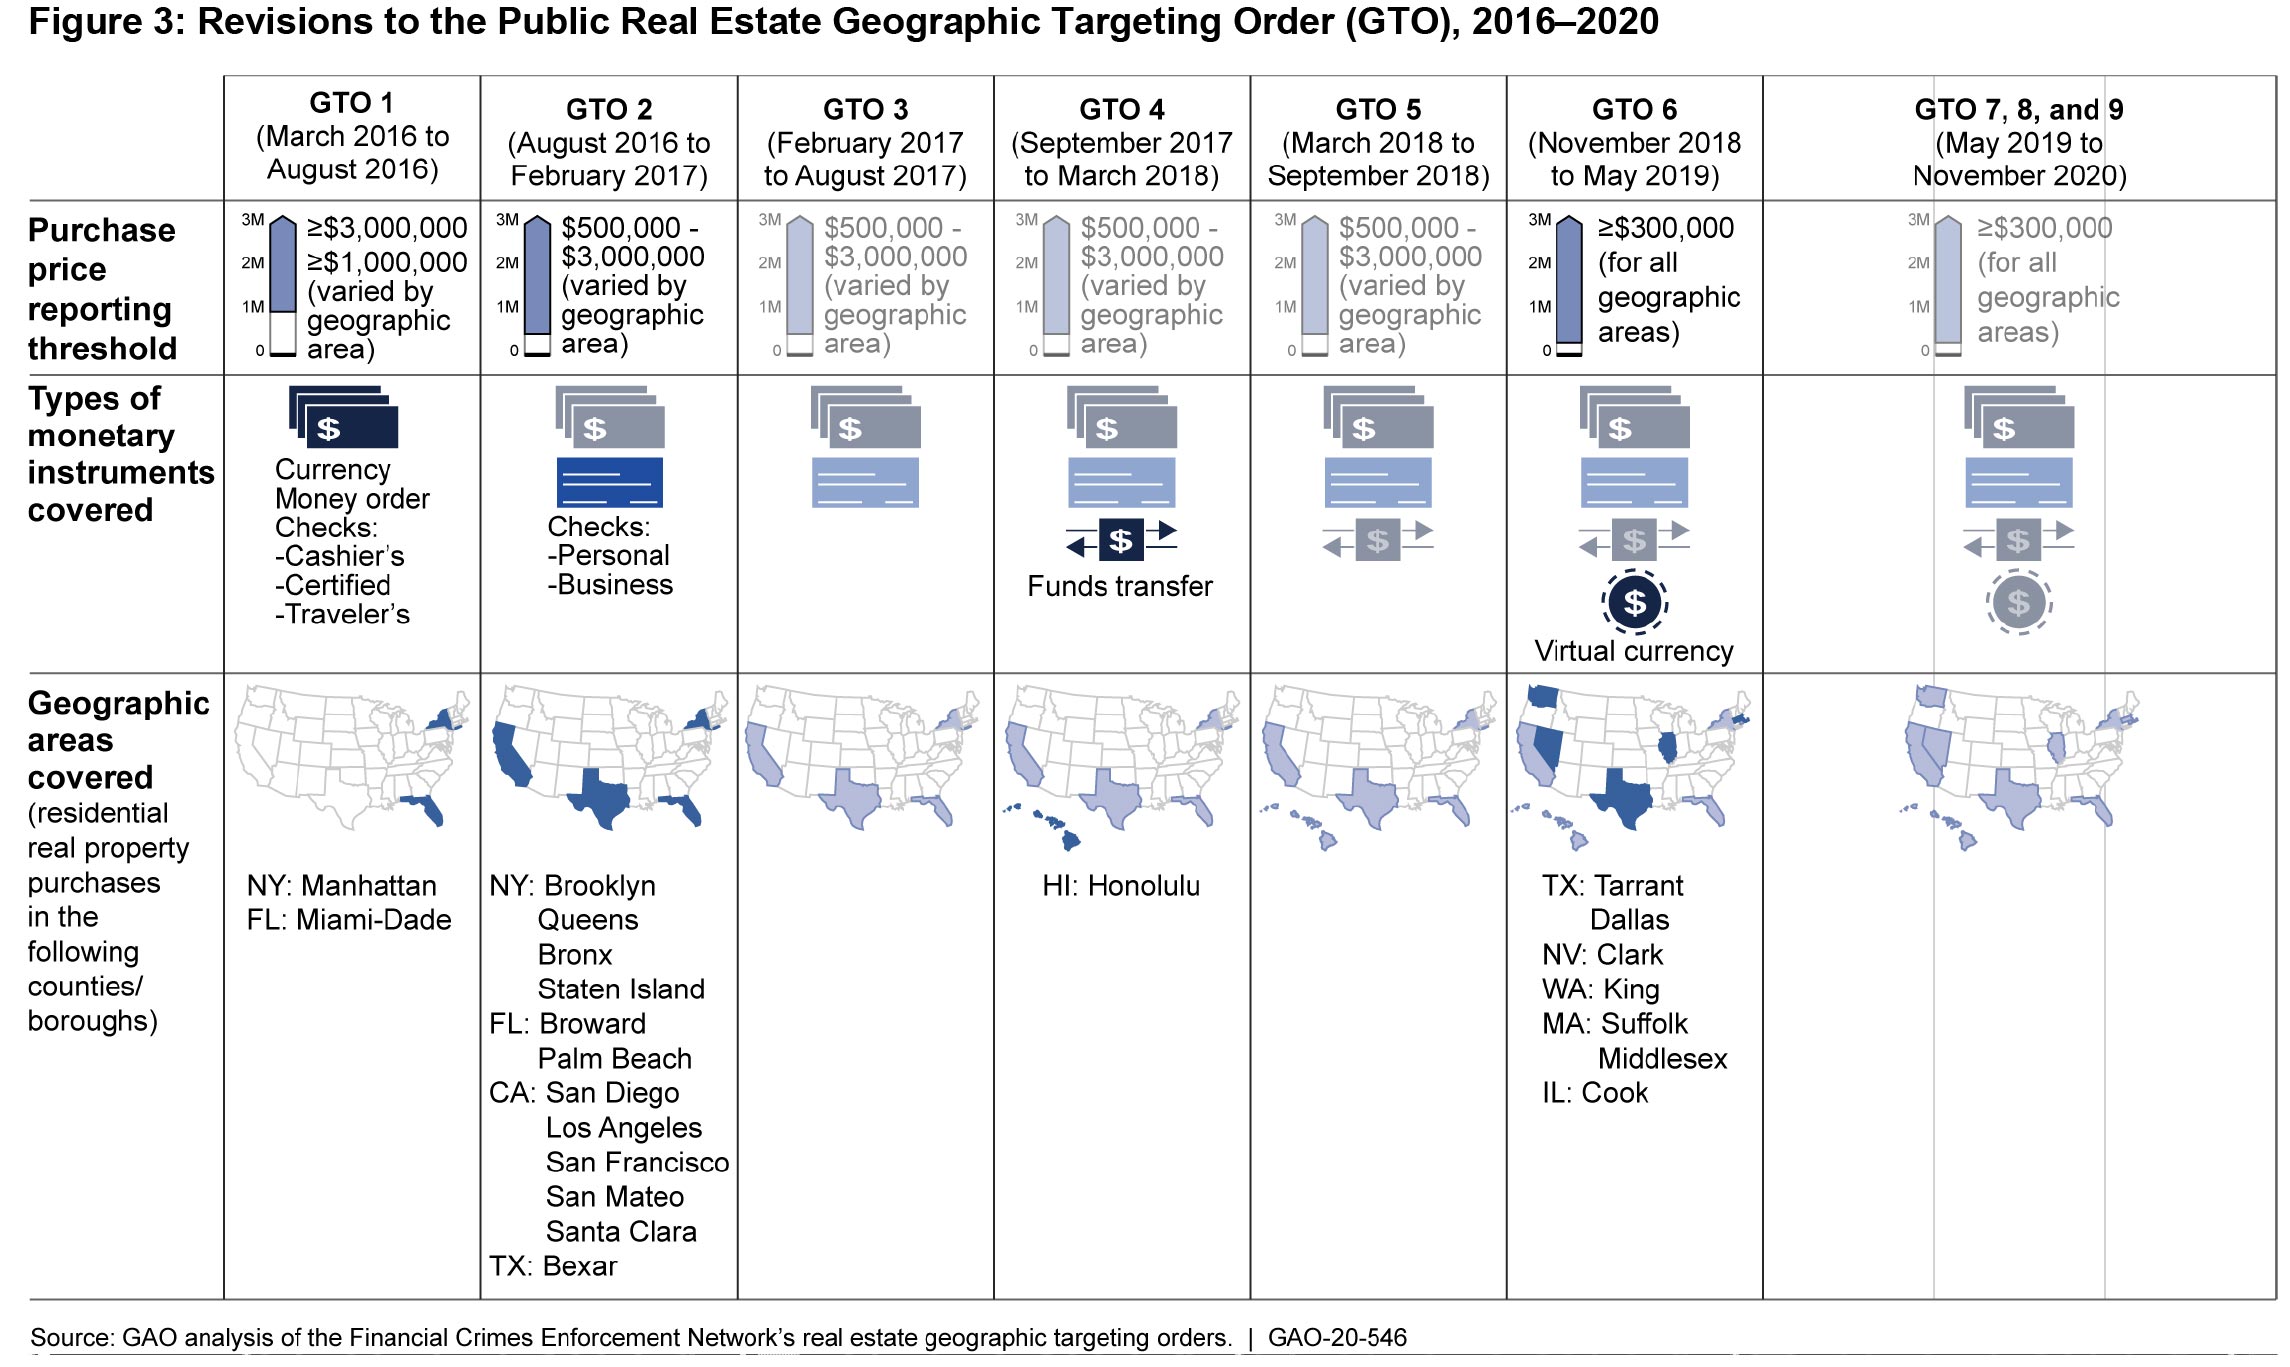 Revisions to the Public Real Estate Geographic Targeting Order